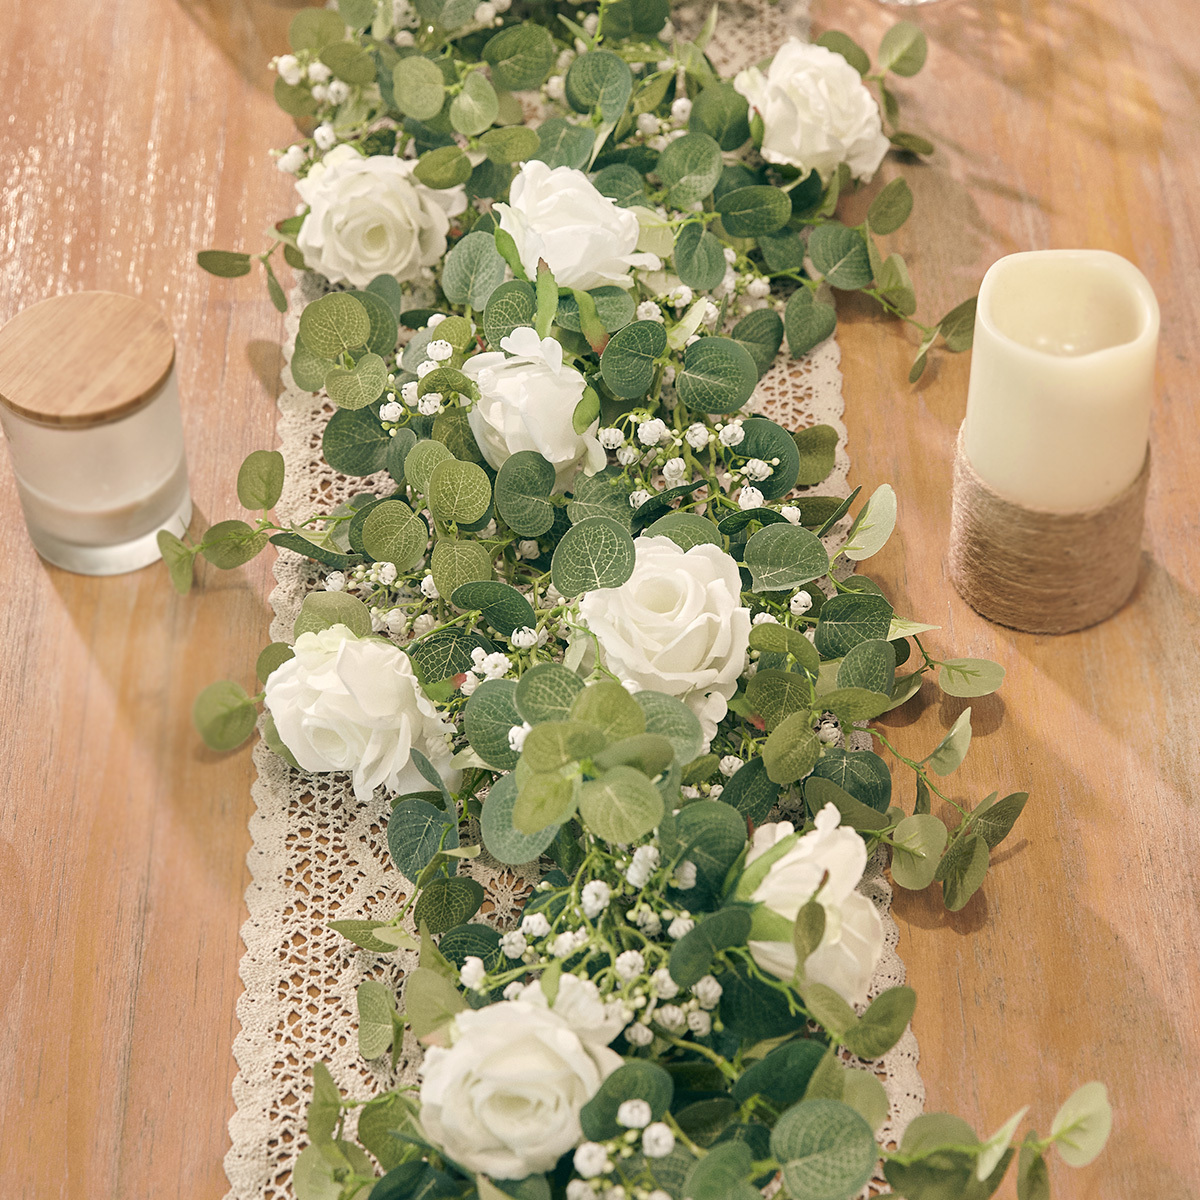 

1pc 70.8in Artificial Eucalyptus Garland With Flowers And Gypsophila - Perfect For Weddings, Home Decor, And Crafts